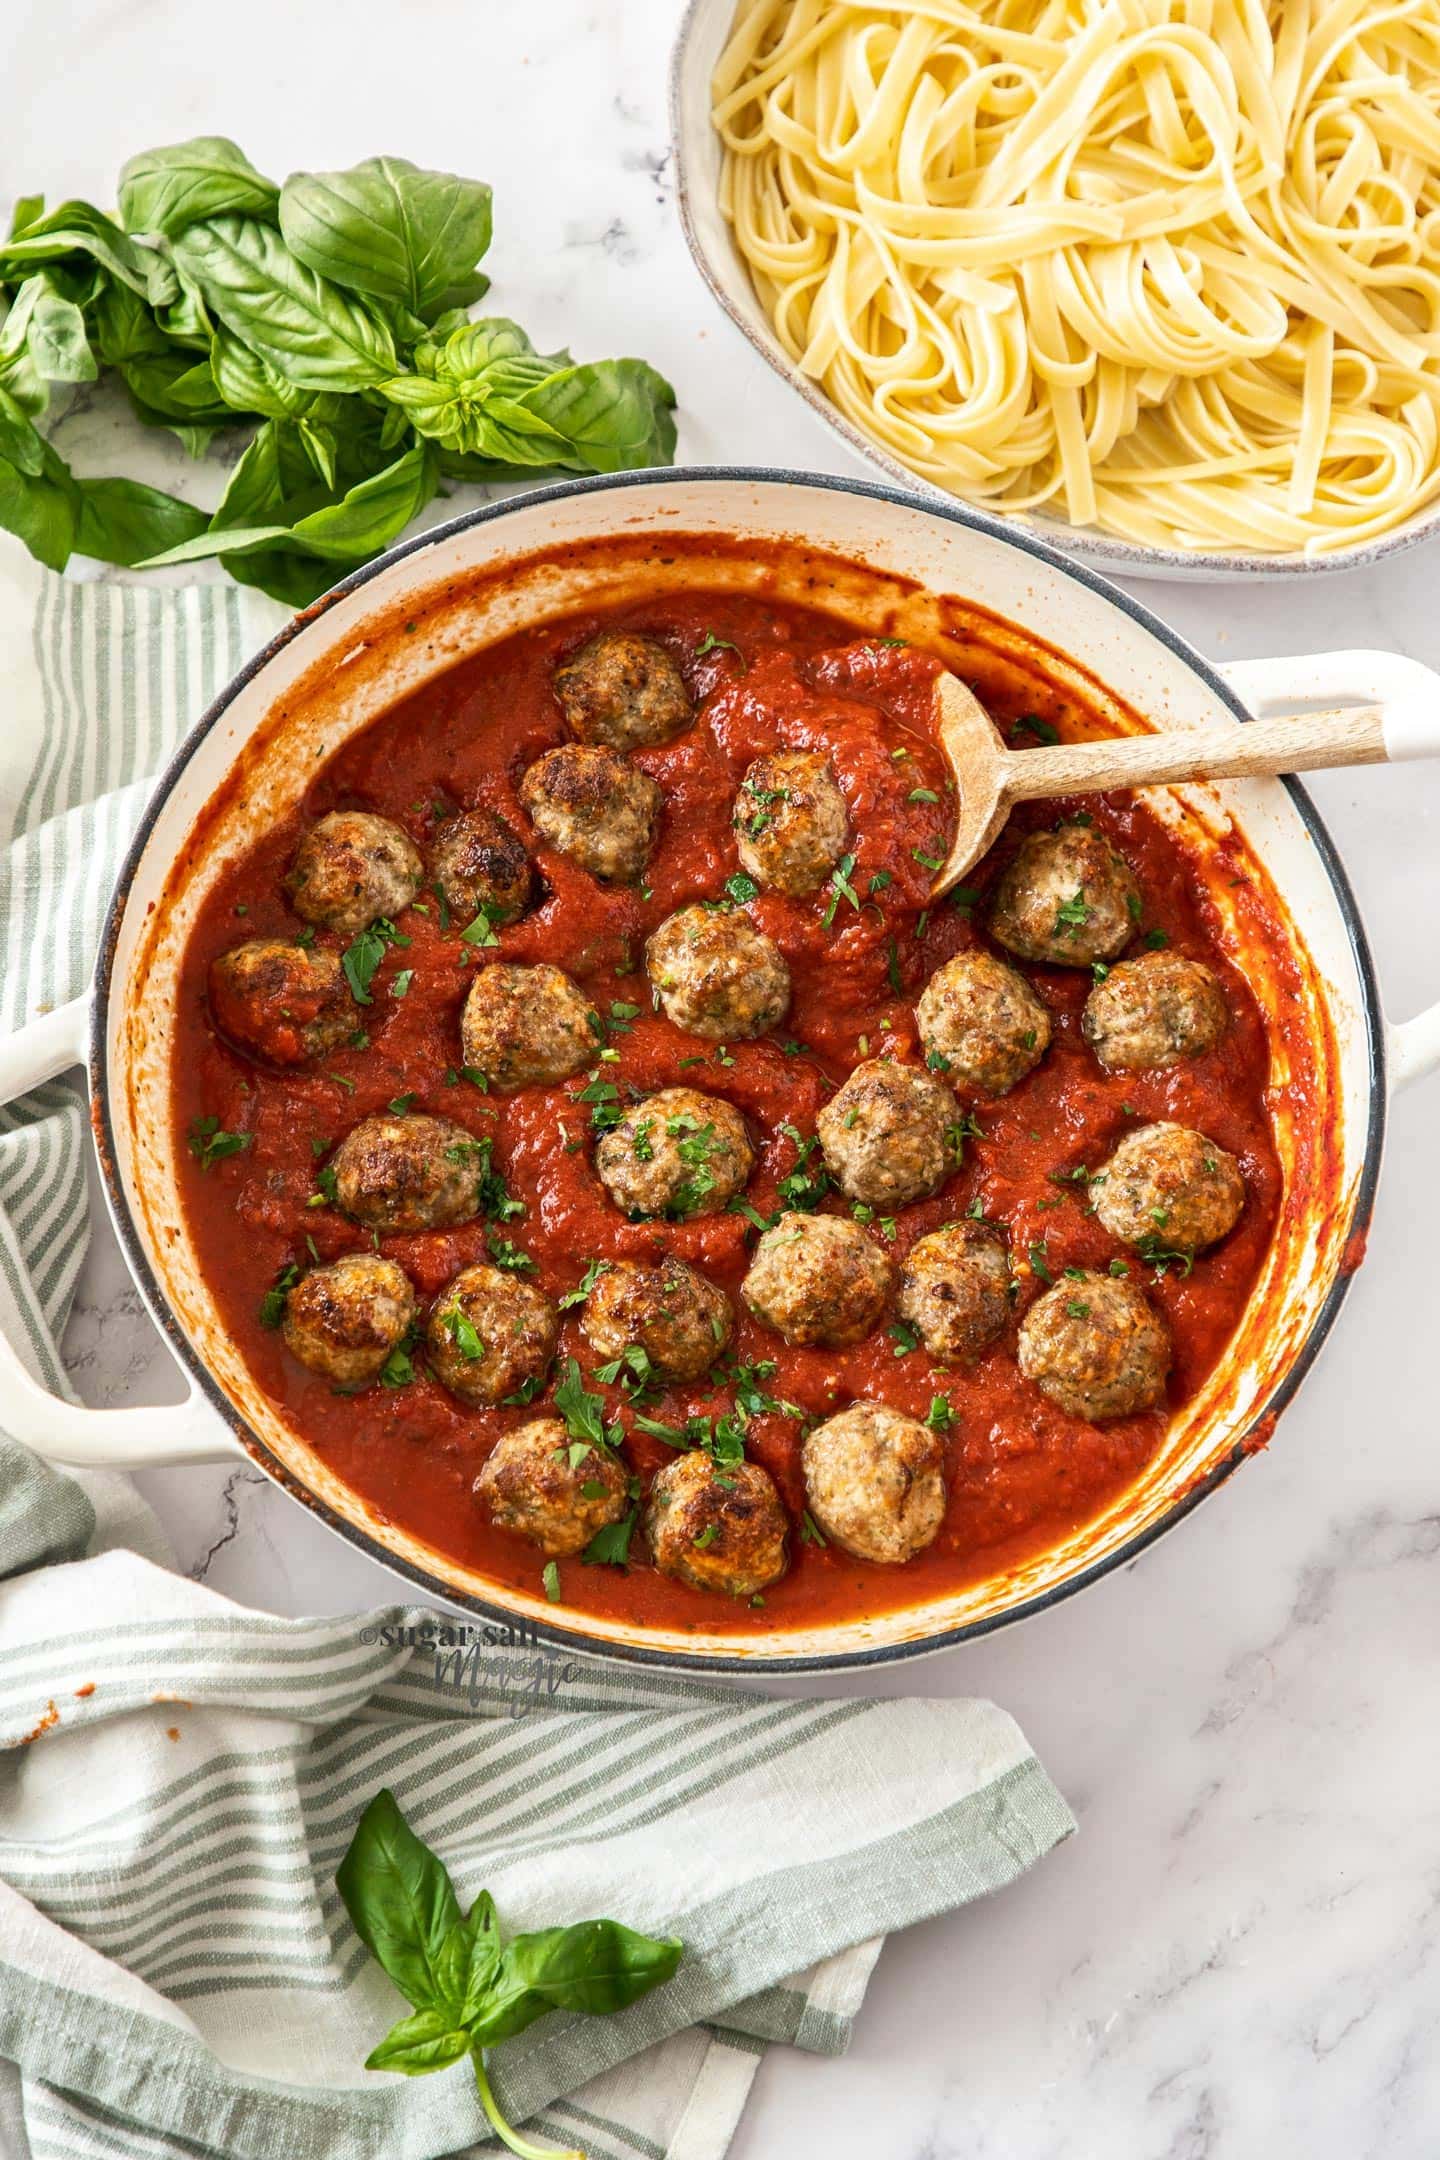 Meatballs in a pan of red pasta sauce with pasta in the background.